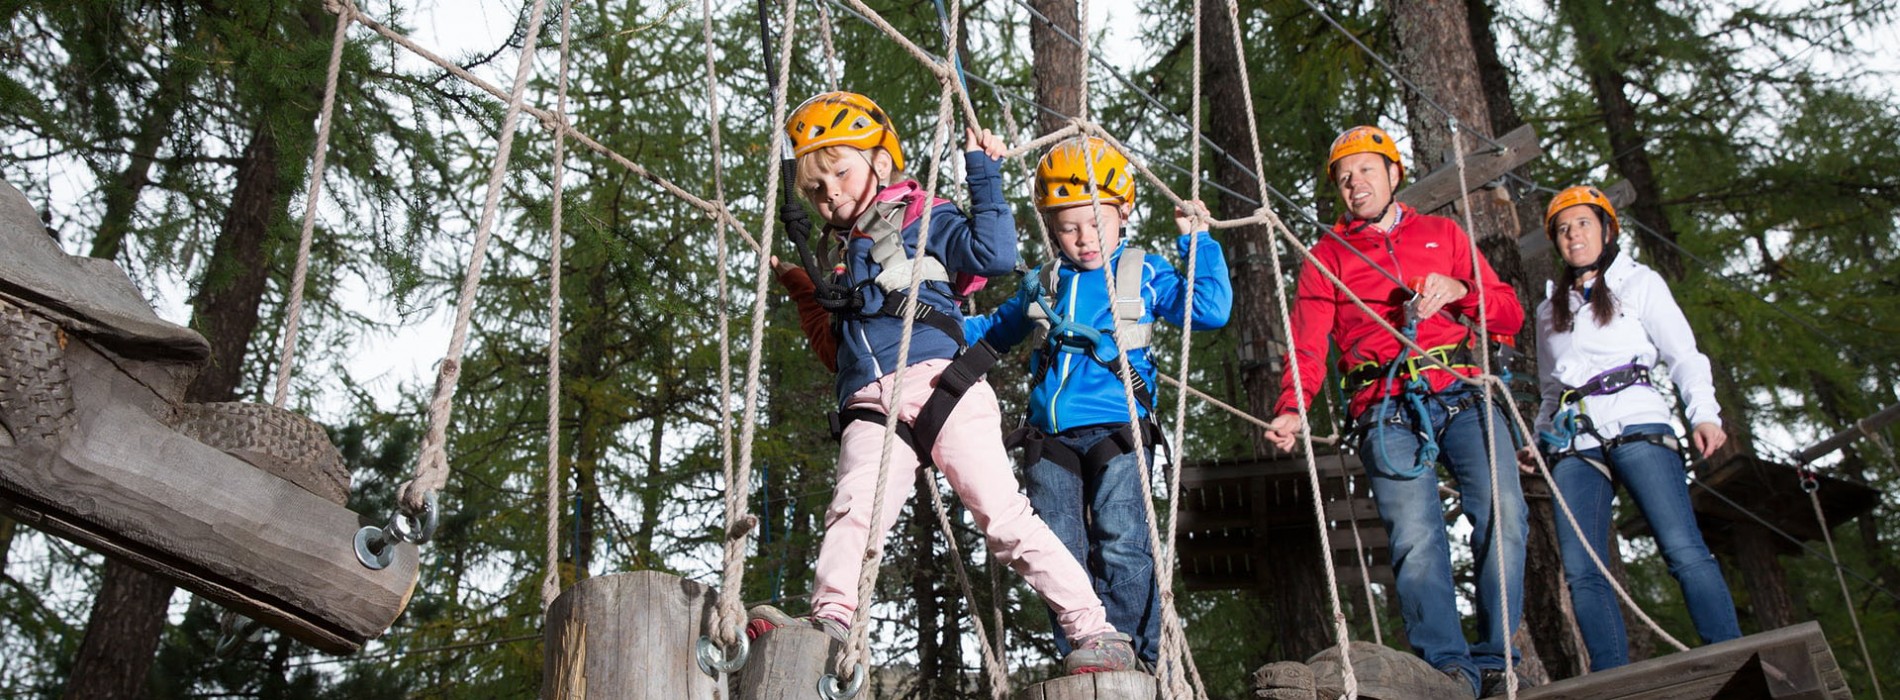 Spend this Summer exploring adventure activities with your family at St. Moritz